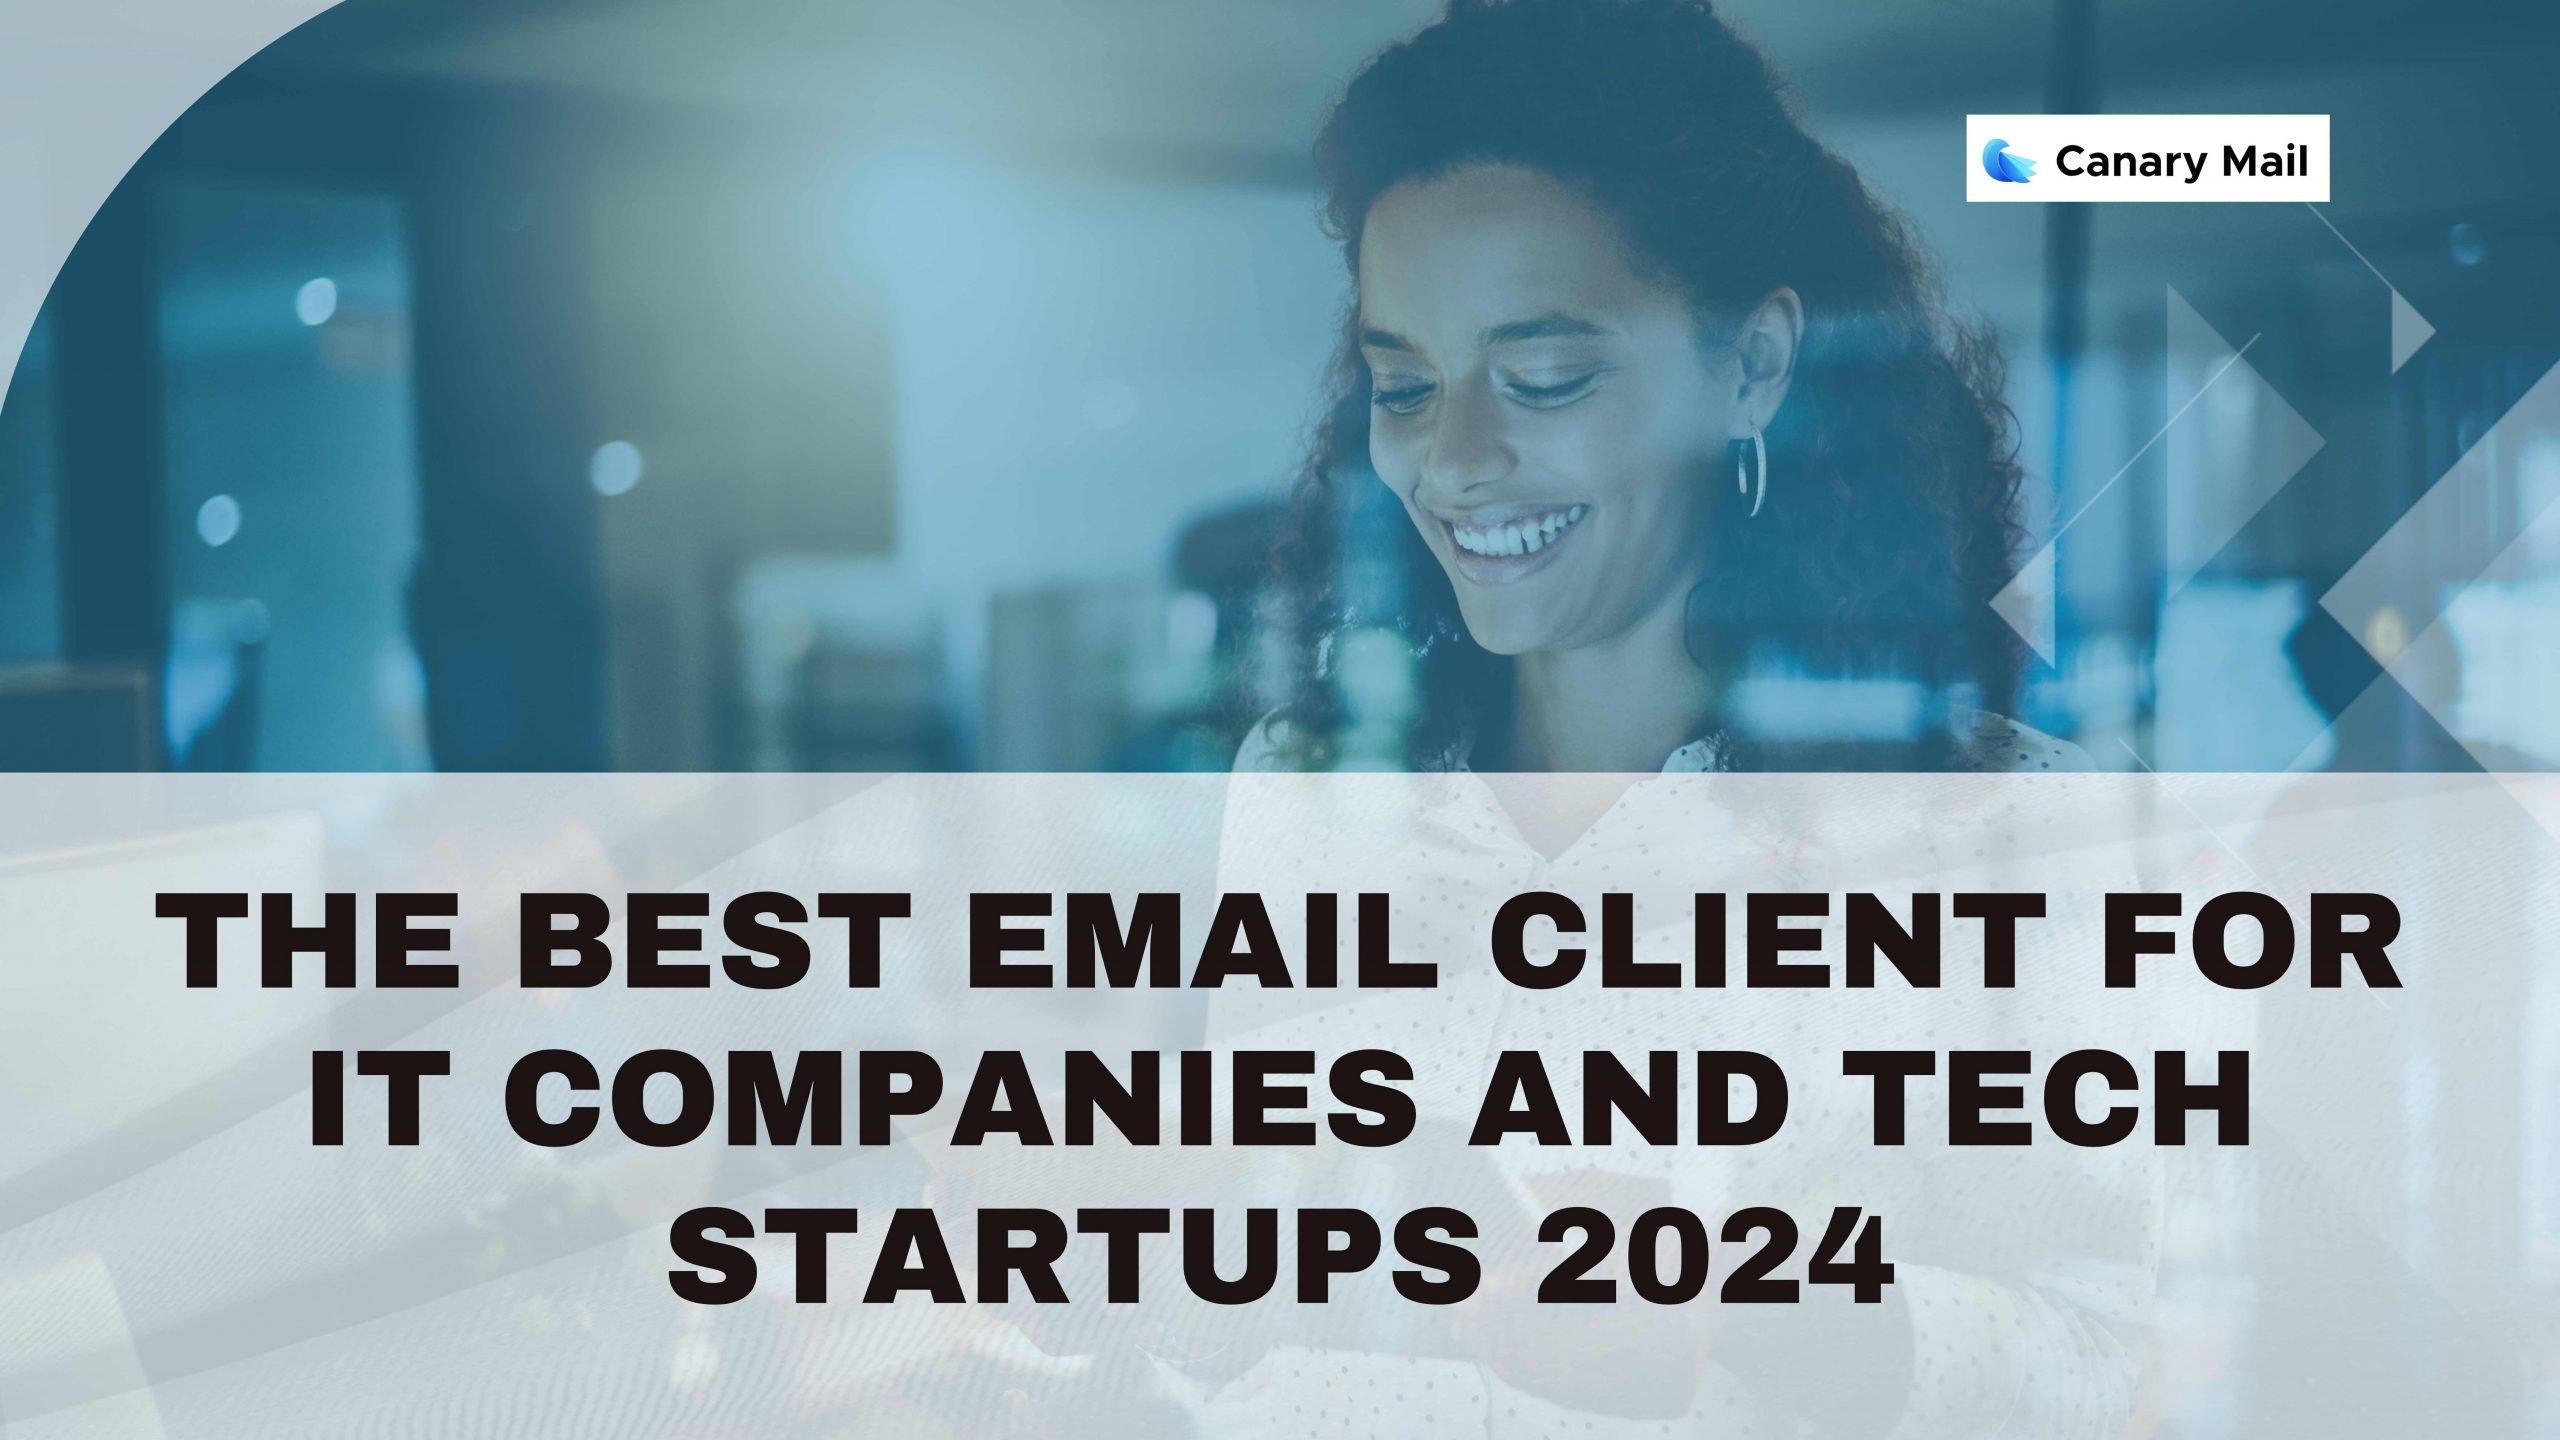 The Best Email Client for IT Companies and Tech Startups 2024